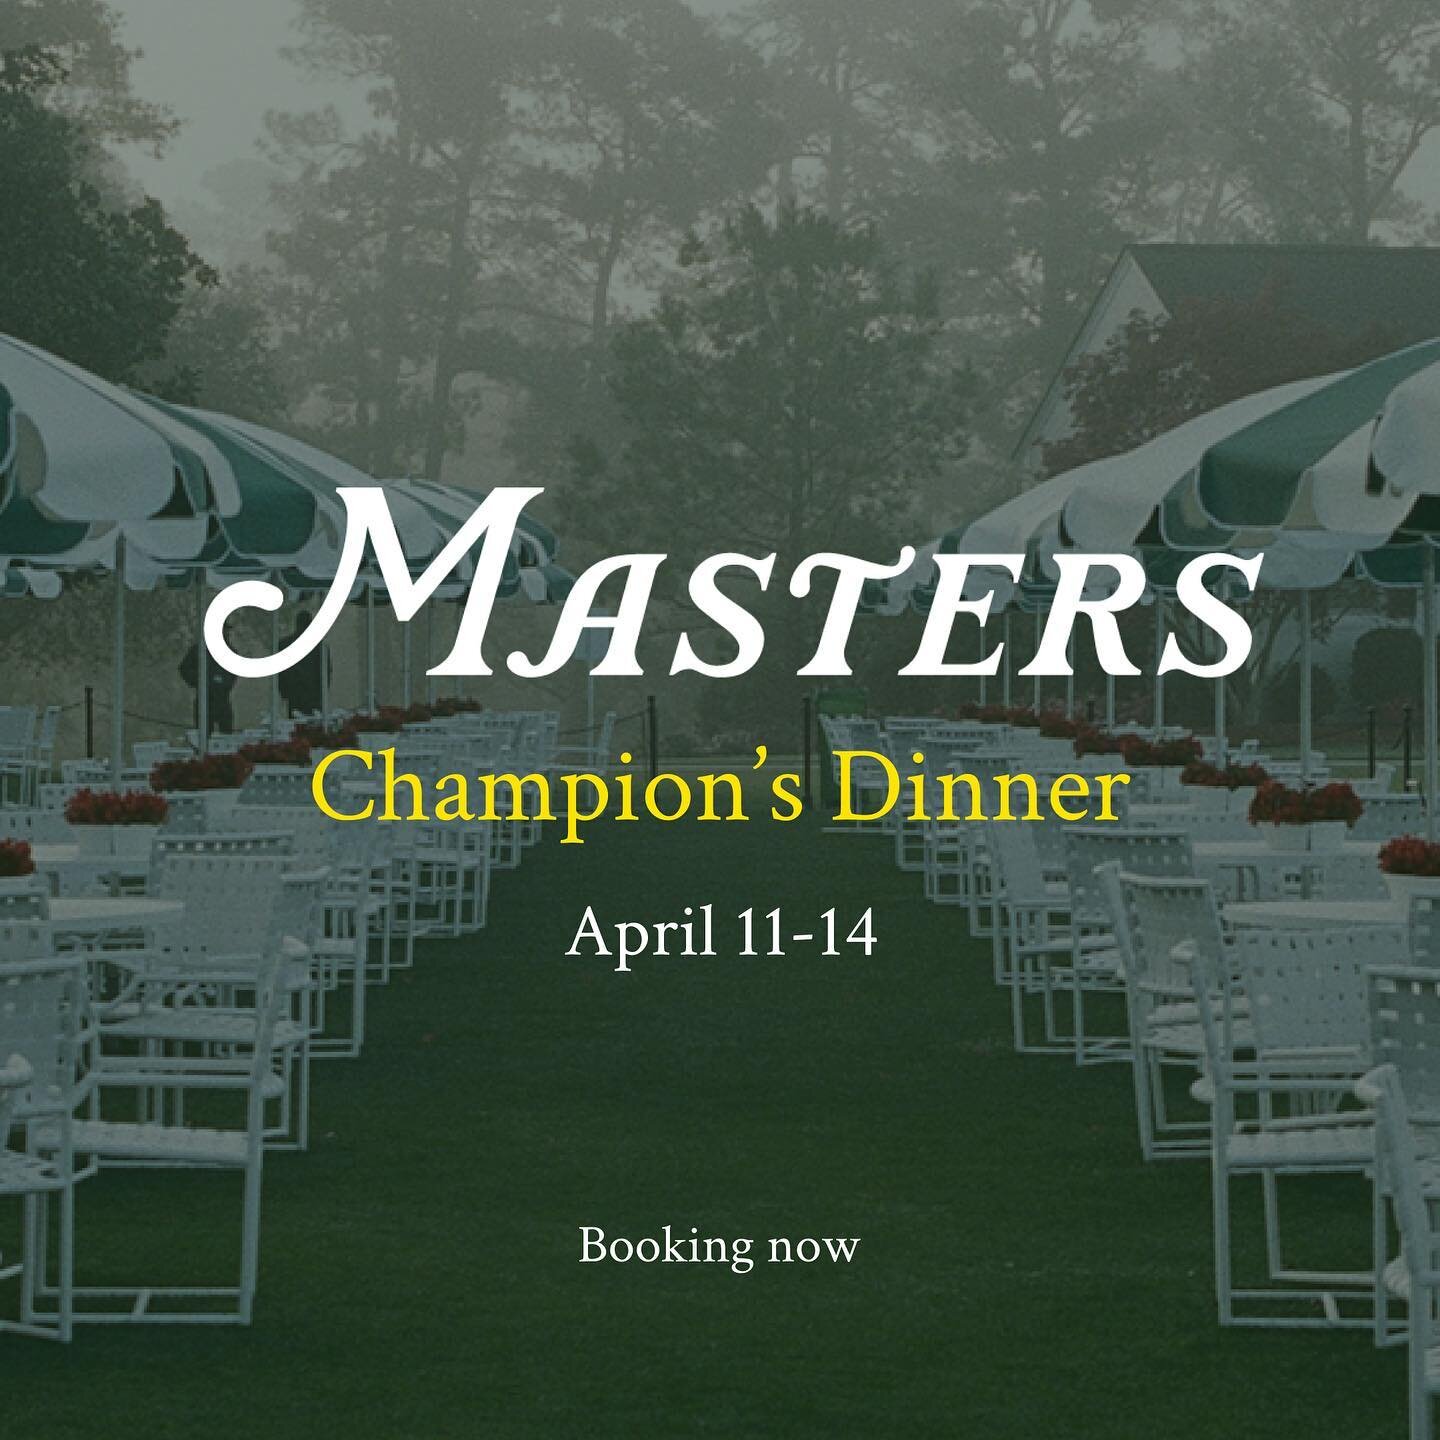 Masters Champion&rsquo;s Dinner! 
Design your own exclusive Masters Champion&rsquo;s Dinner inspired by the menus of past winners

We will tailor the meal preparation and service style to suit your party&rsquo;s preferences. Our services include food